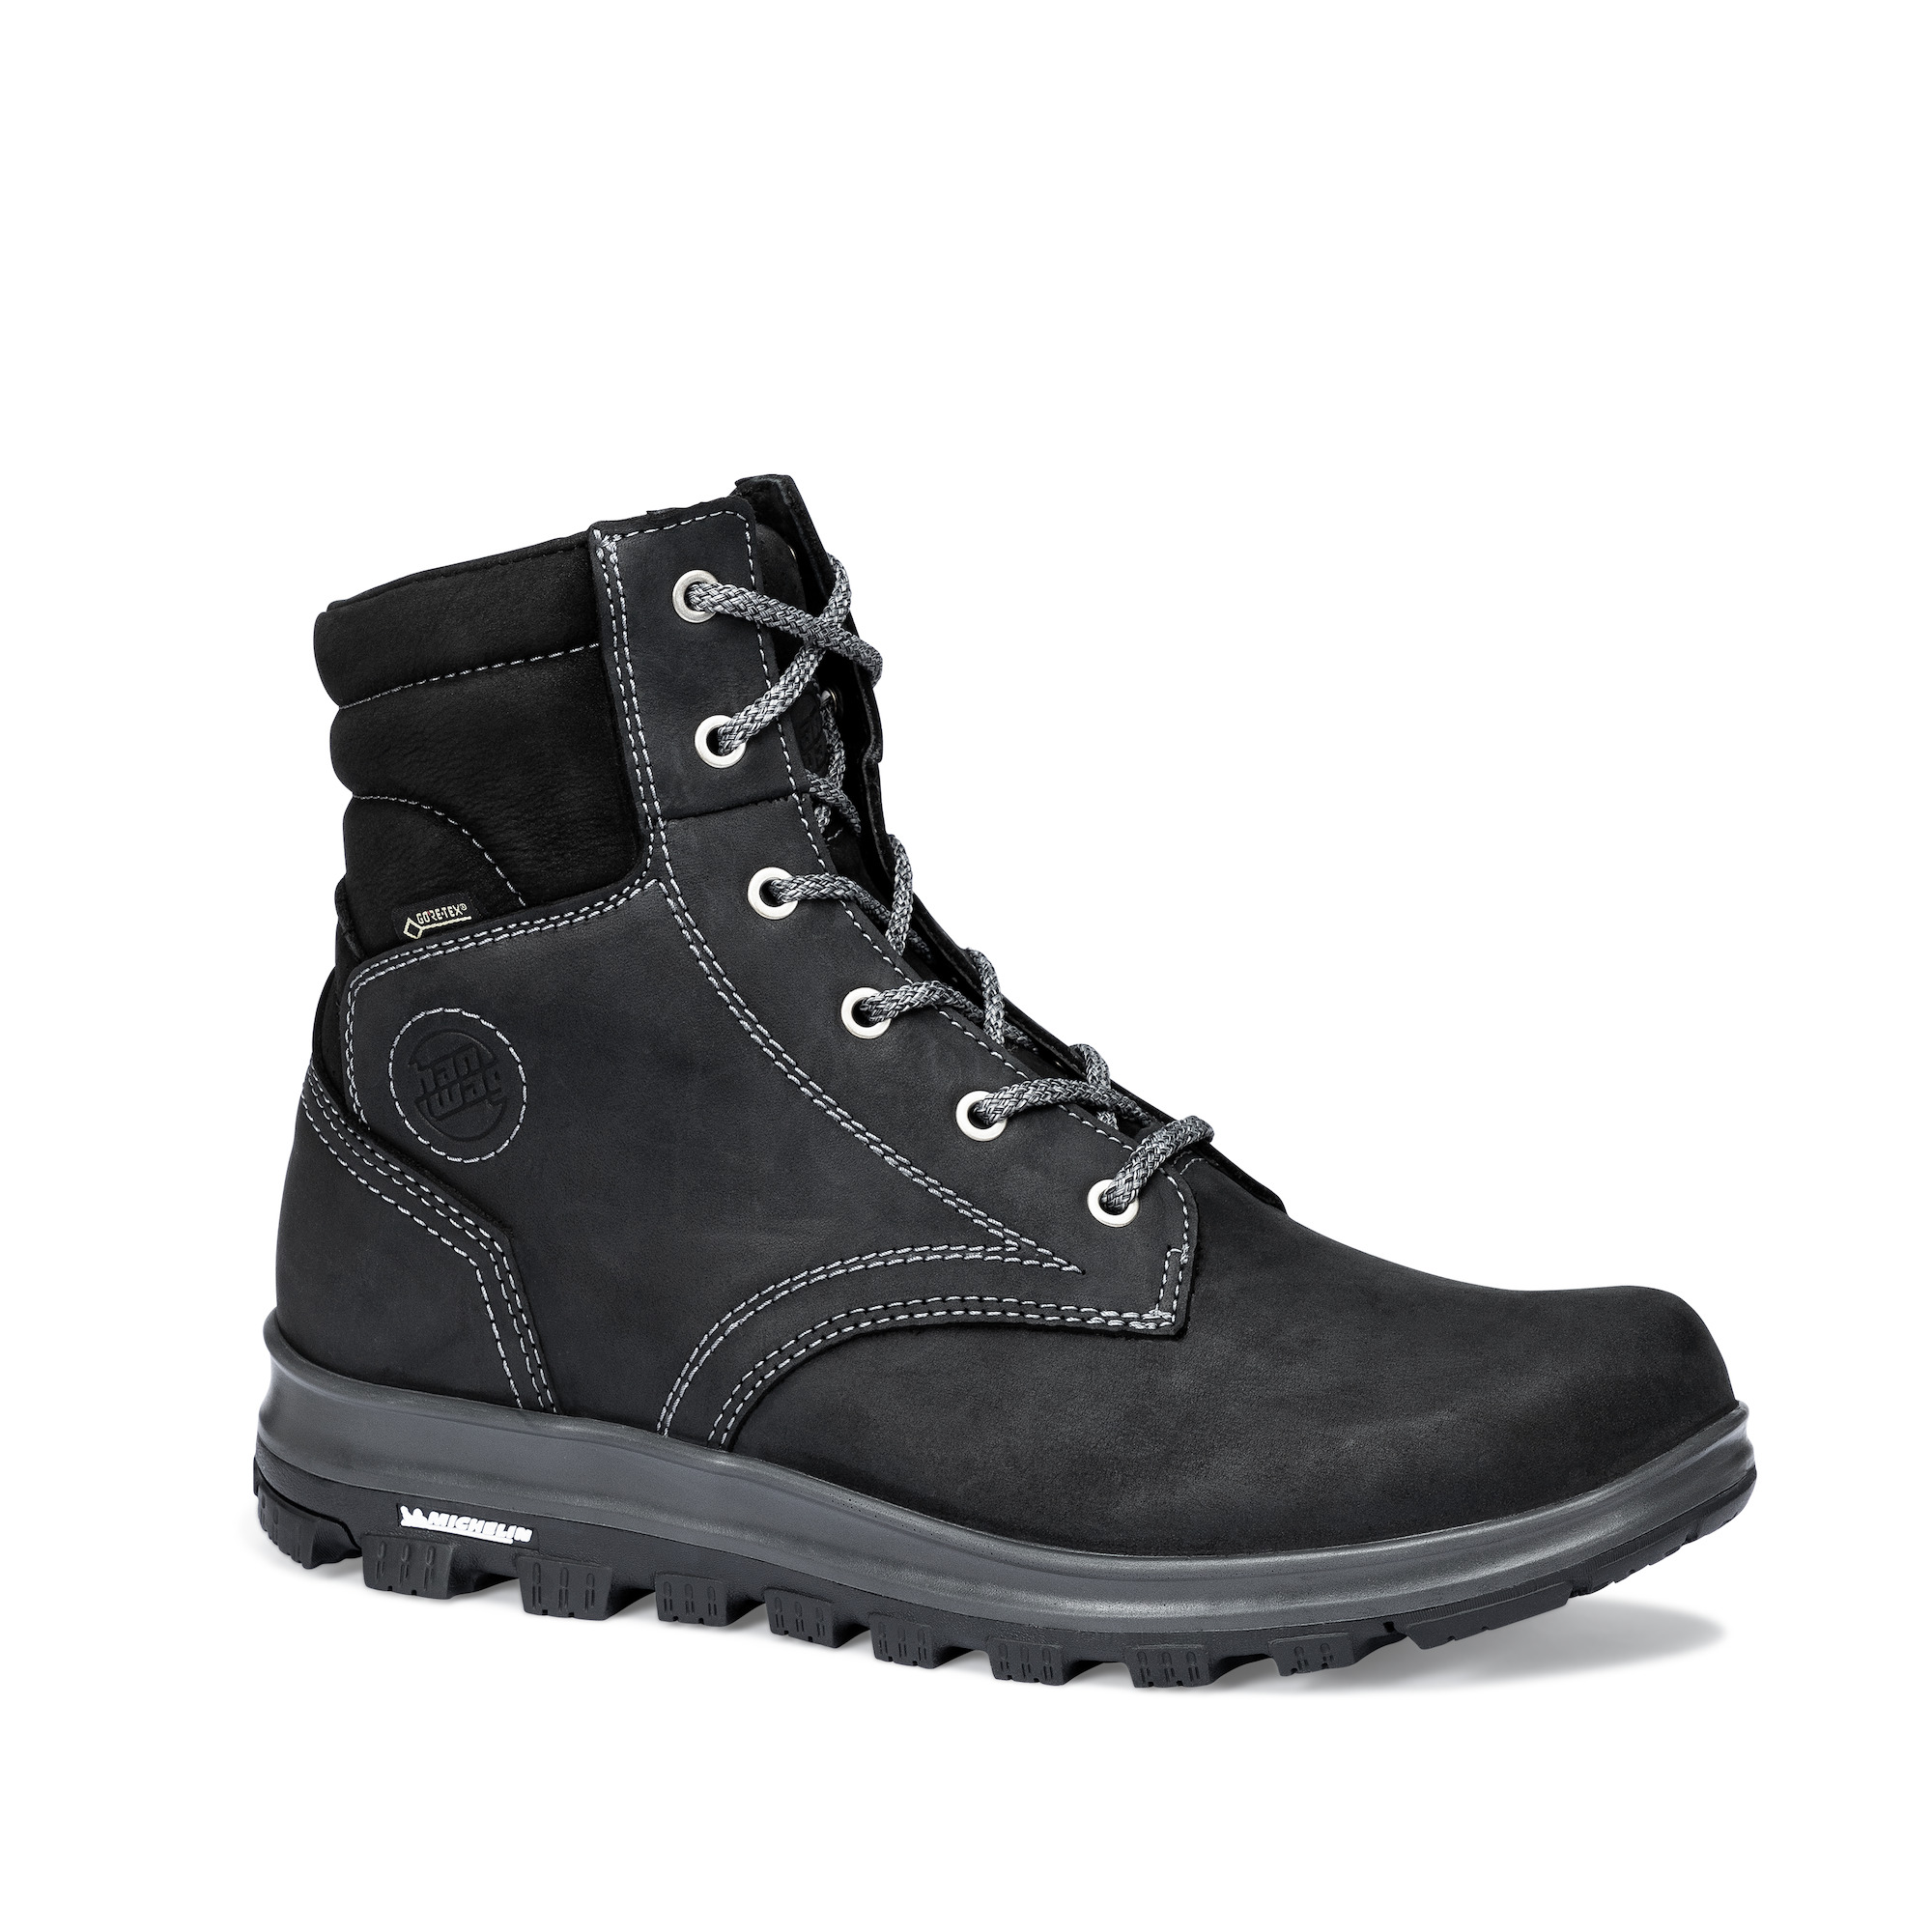 Mountaineering Boots, Trekking and Hiking Boots | Hanwag